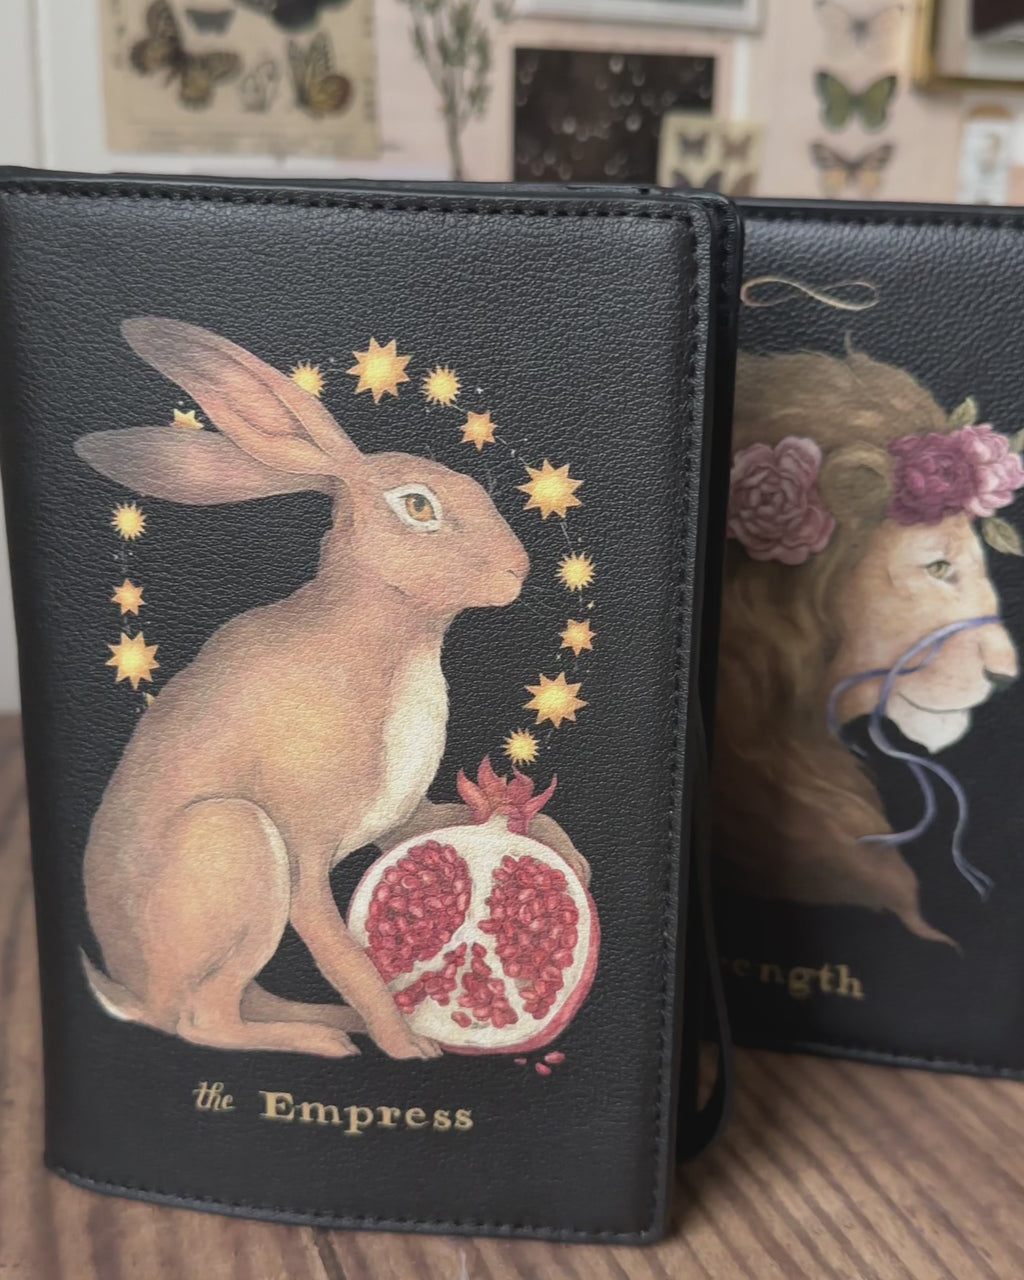 Jessica Roux Strength Tarot Tales Pouch by Fable England